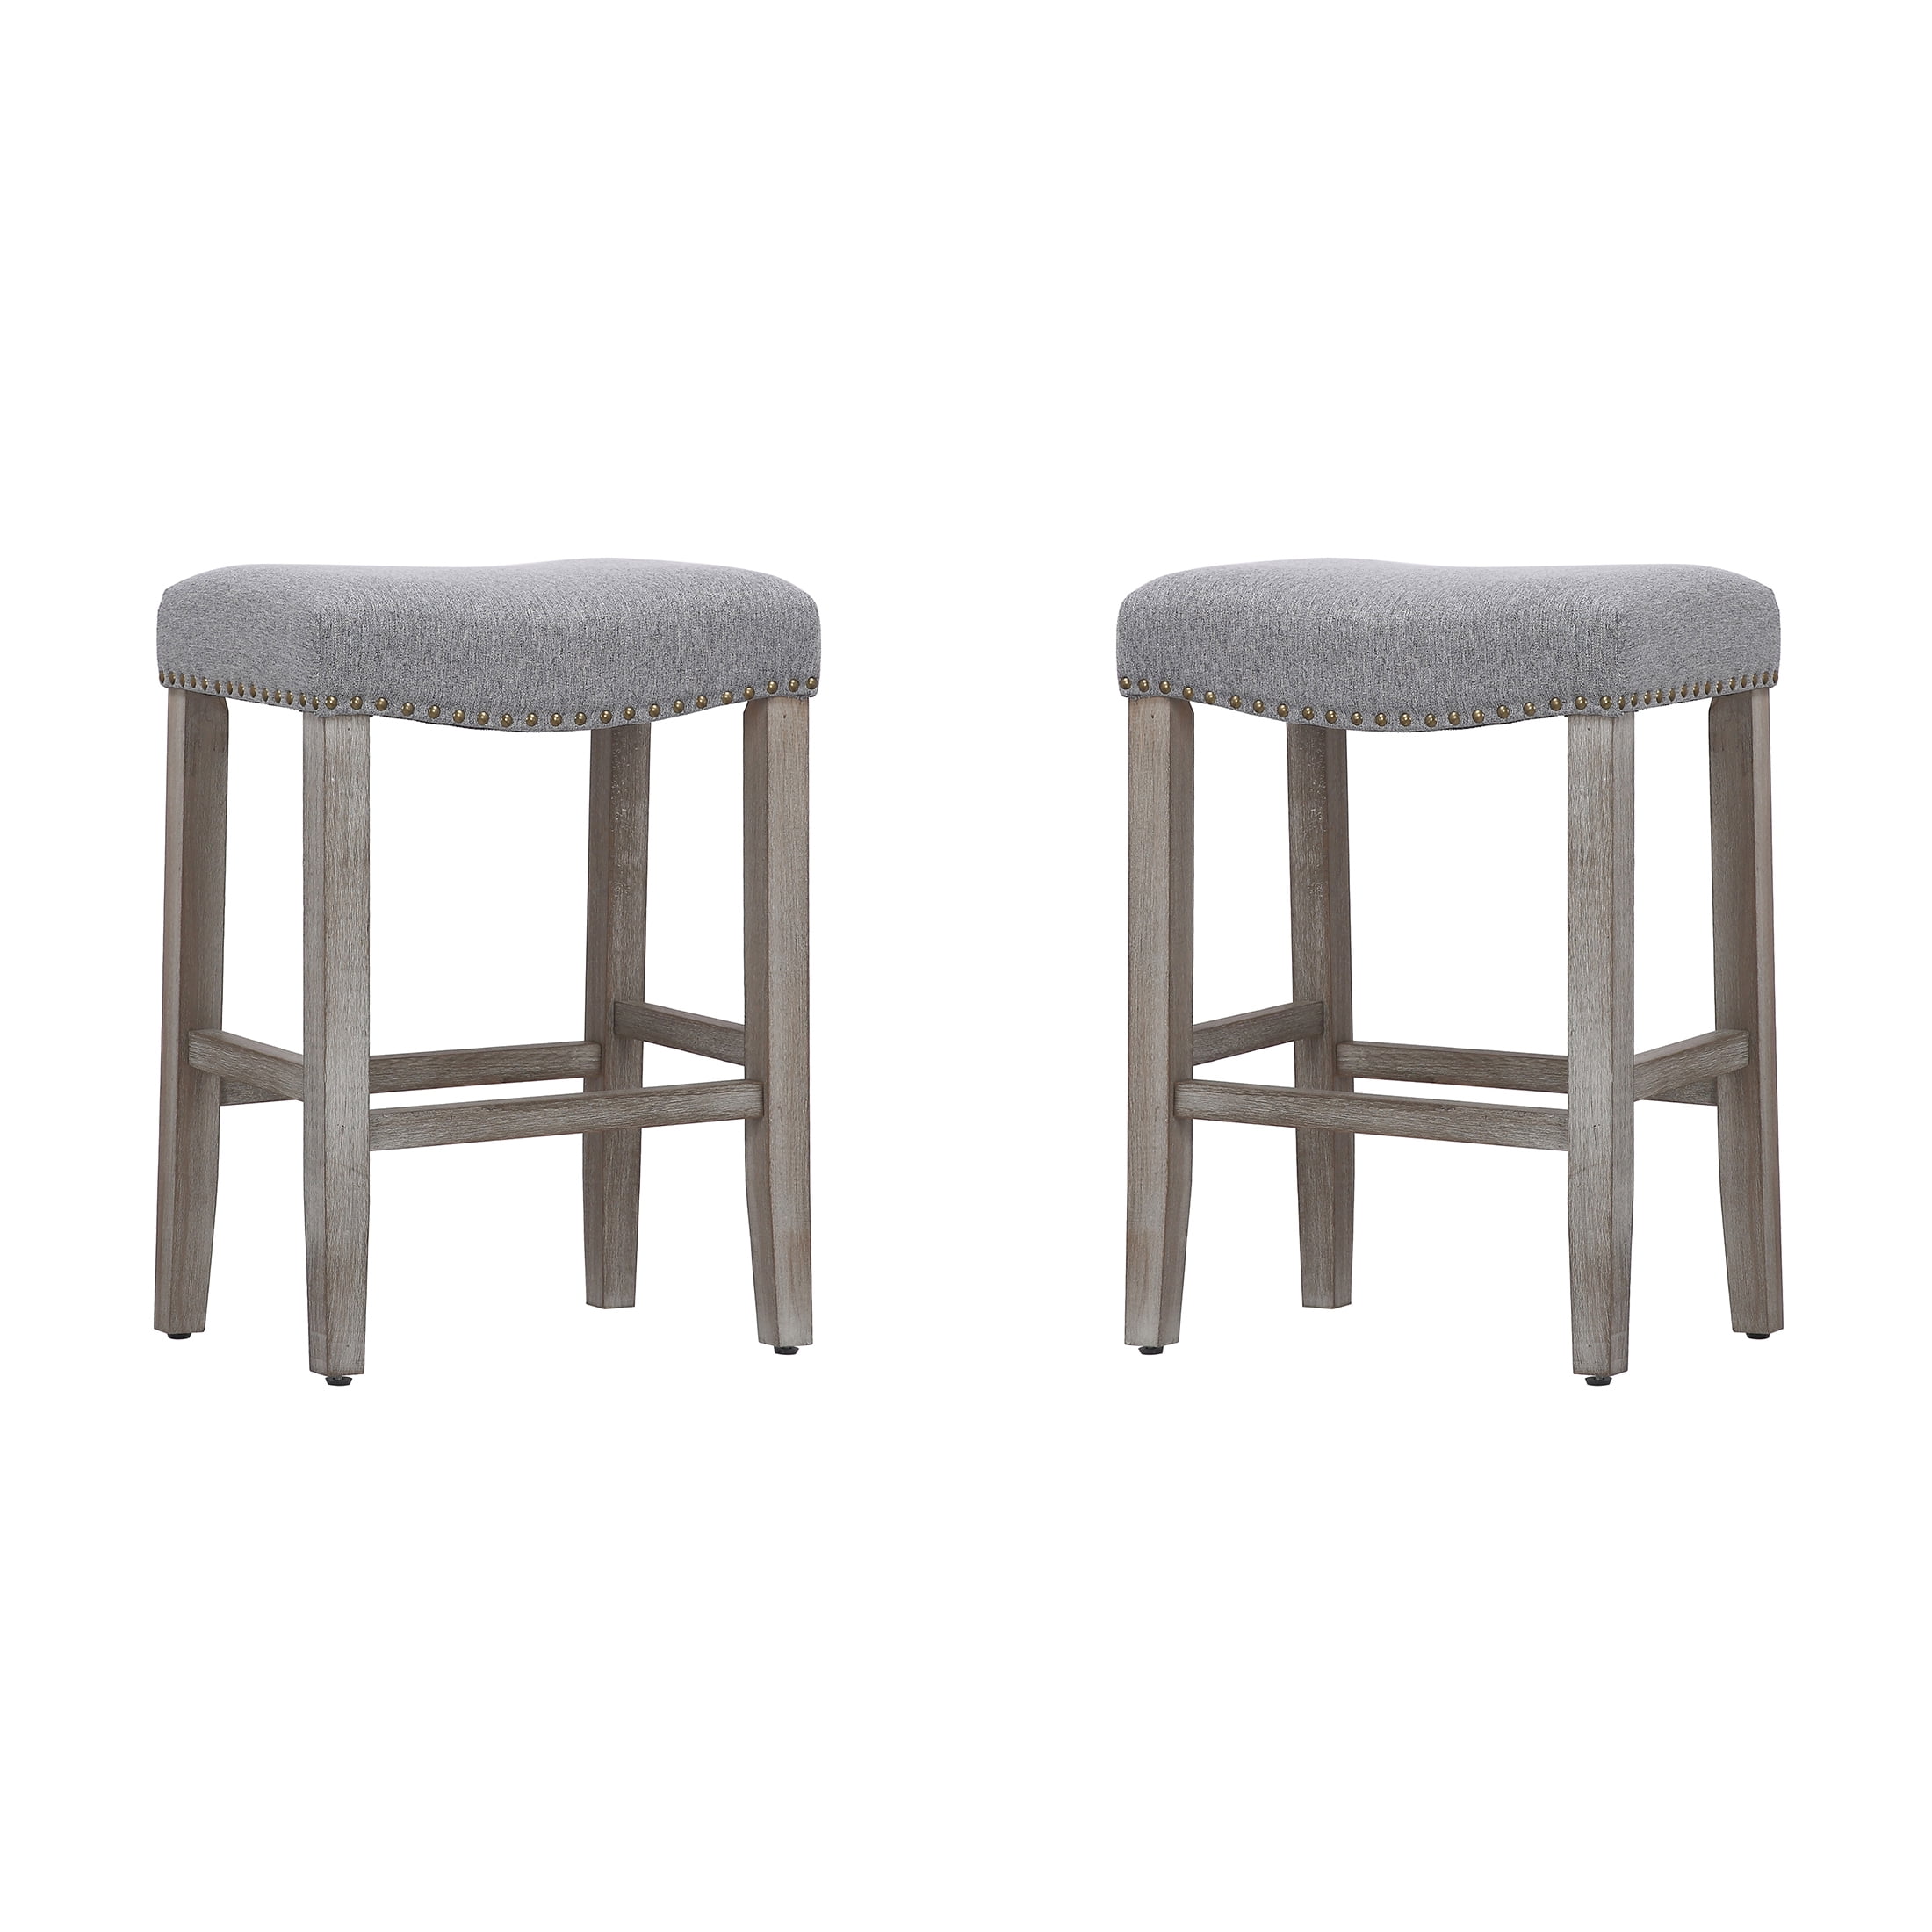 UPHOLSTE SADDLE SEAT BAR STOOL FINISH WITH 24 INCH SEAT HEIGHT. SET OF TWO 